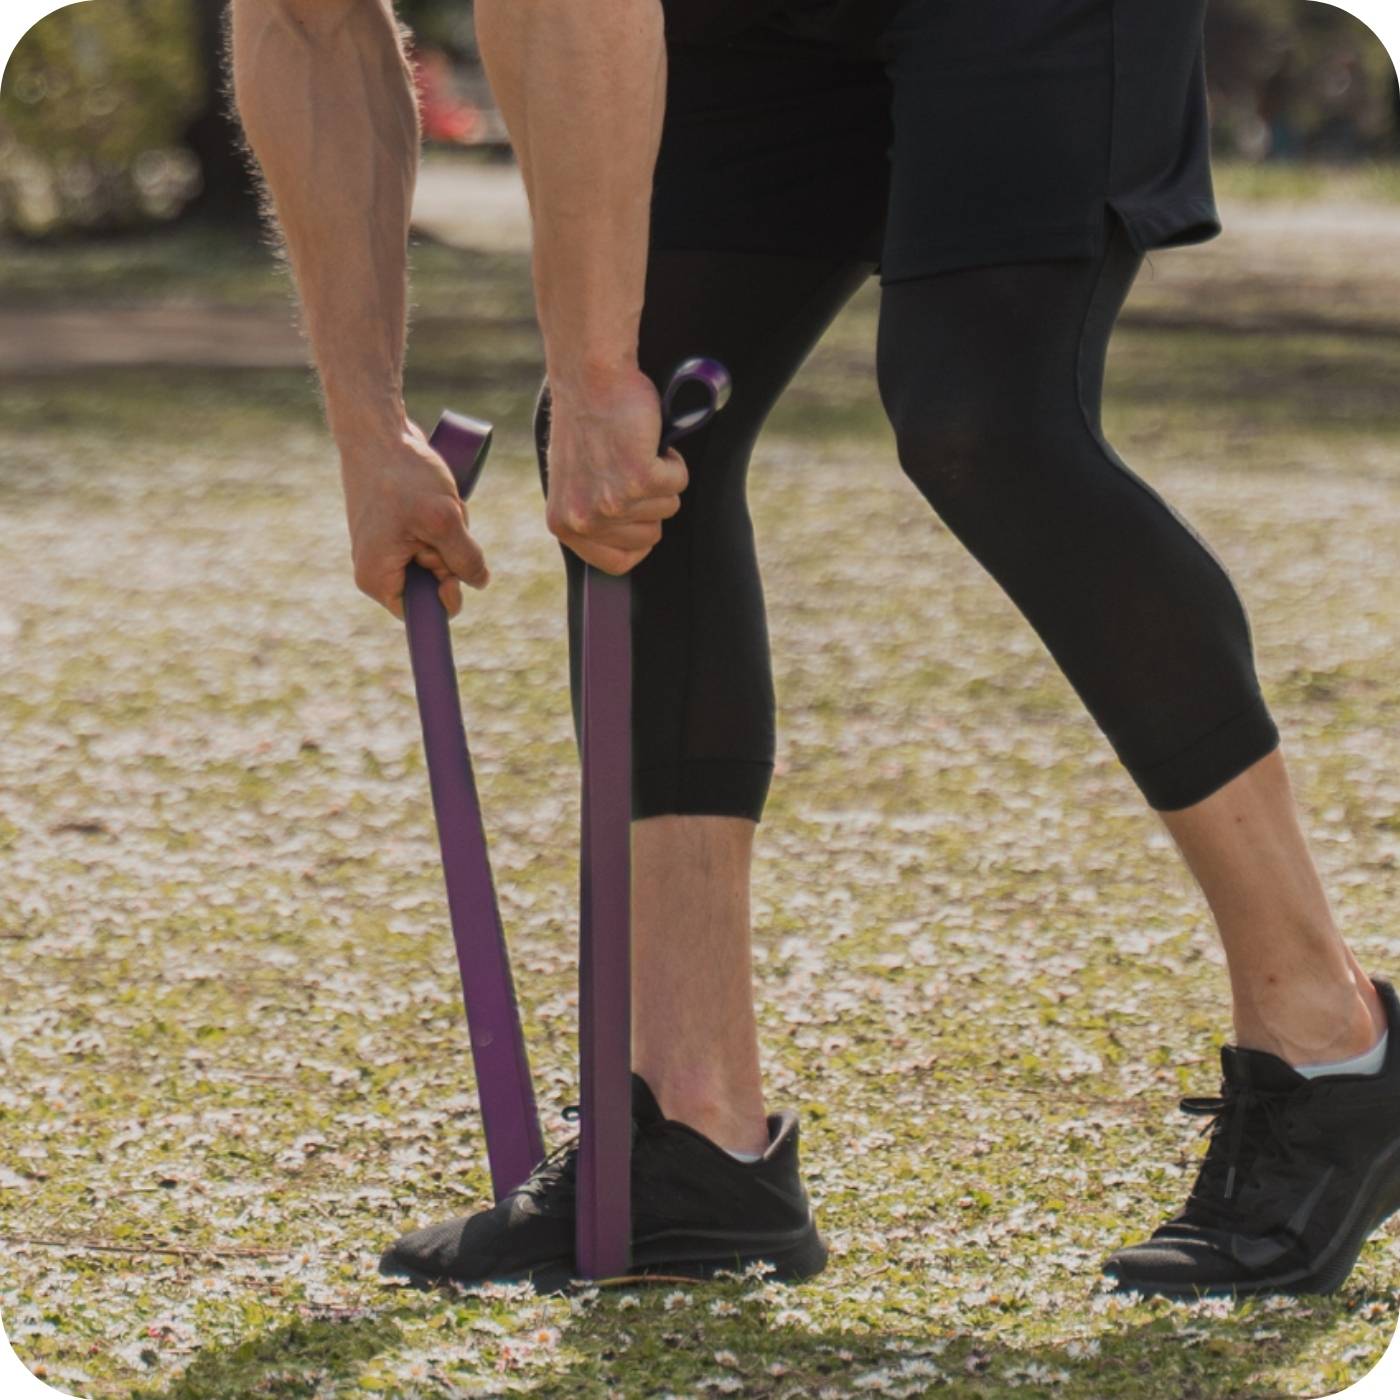 man using 3dactive purple resistance band in the park